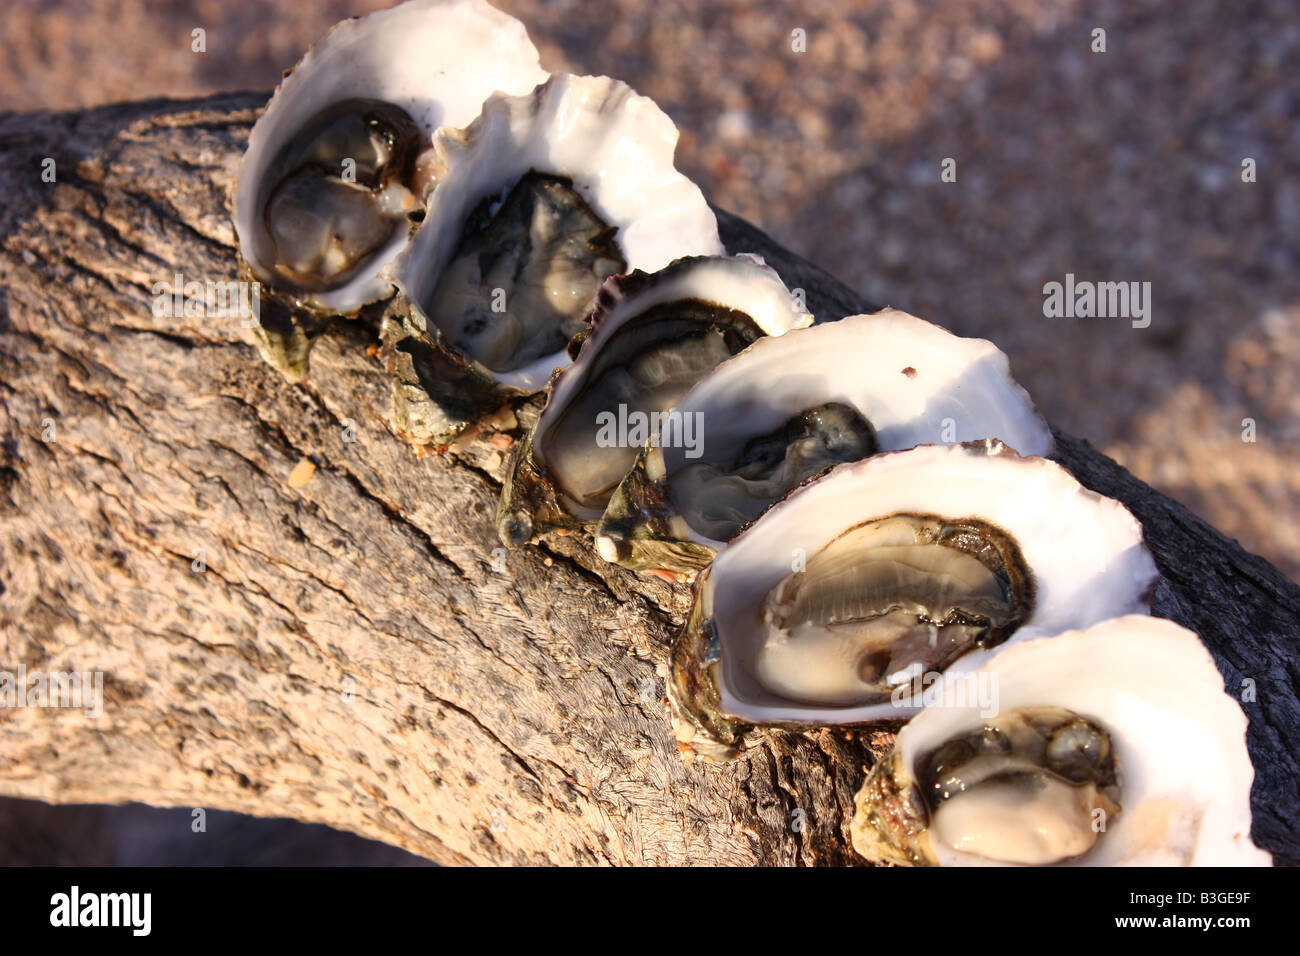 oysters naturale photographed on a log found at the beach in south australia Stock Photo